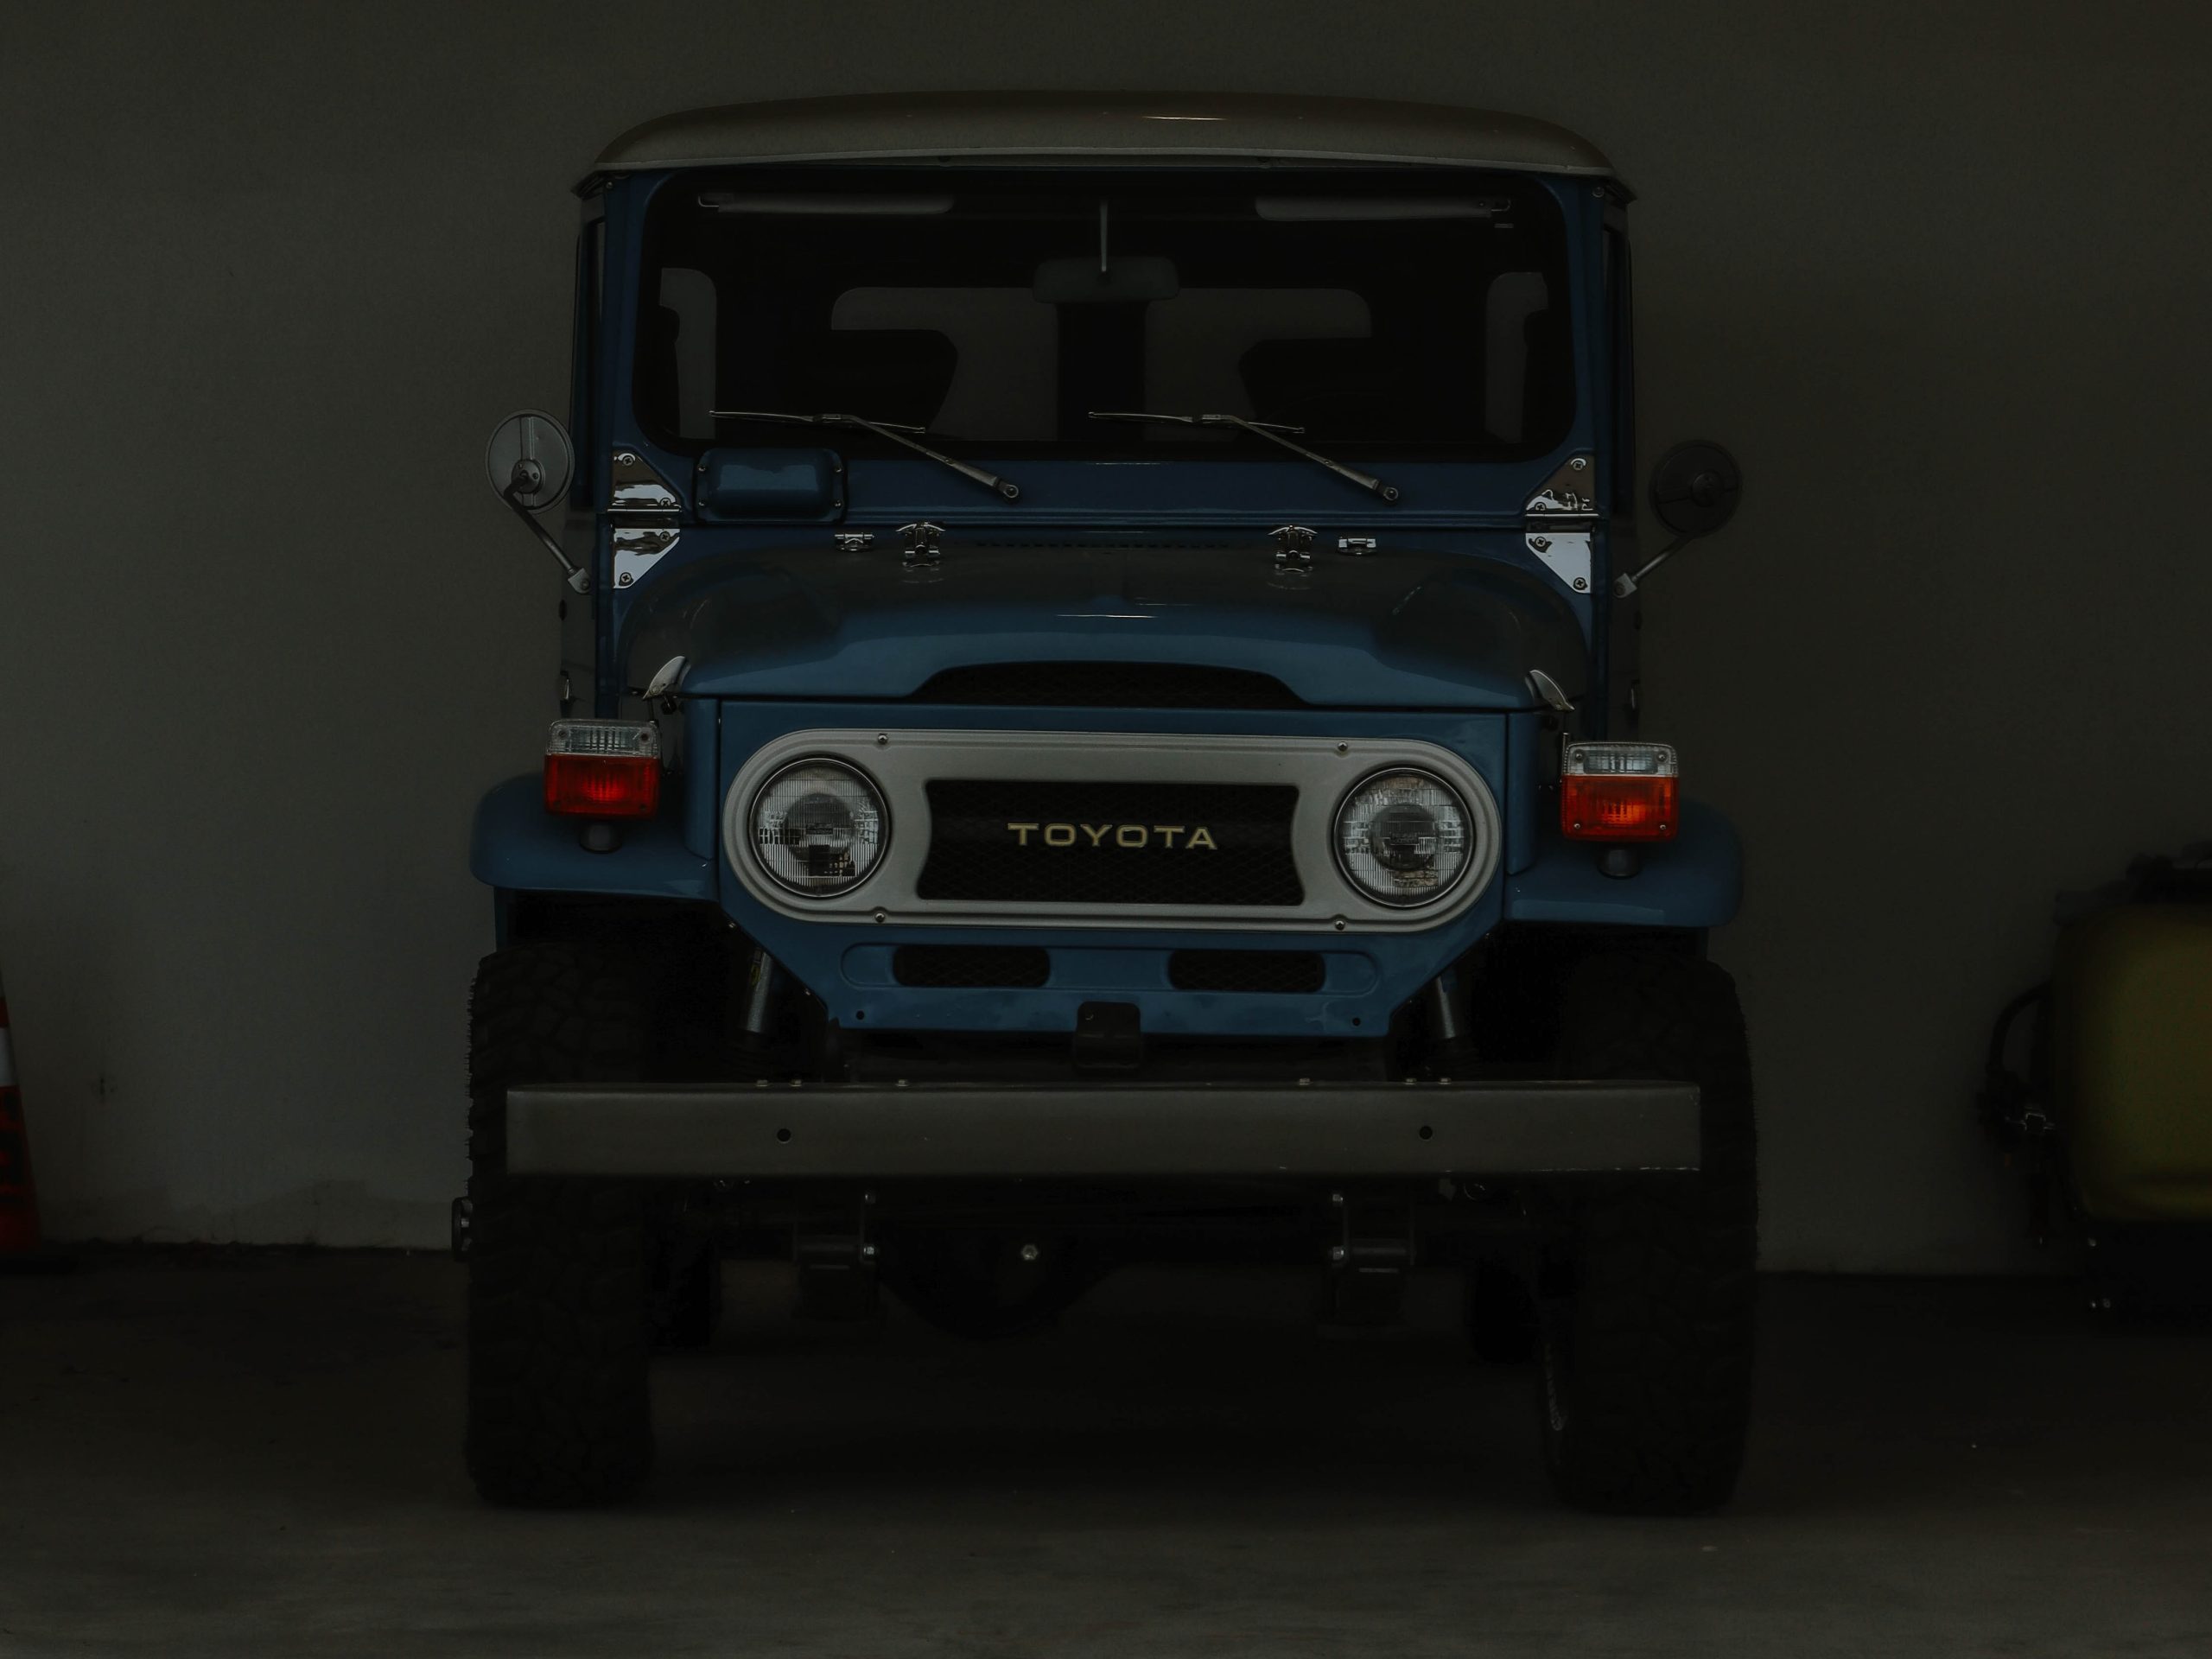 Blue Suv Parked in Garage | Veteran Car Donations